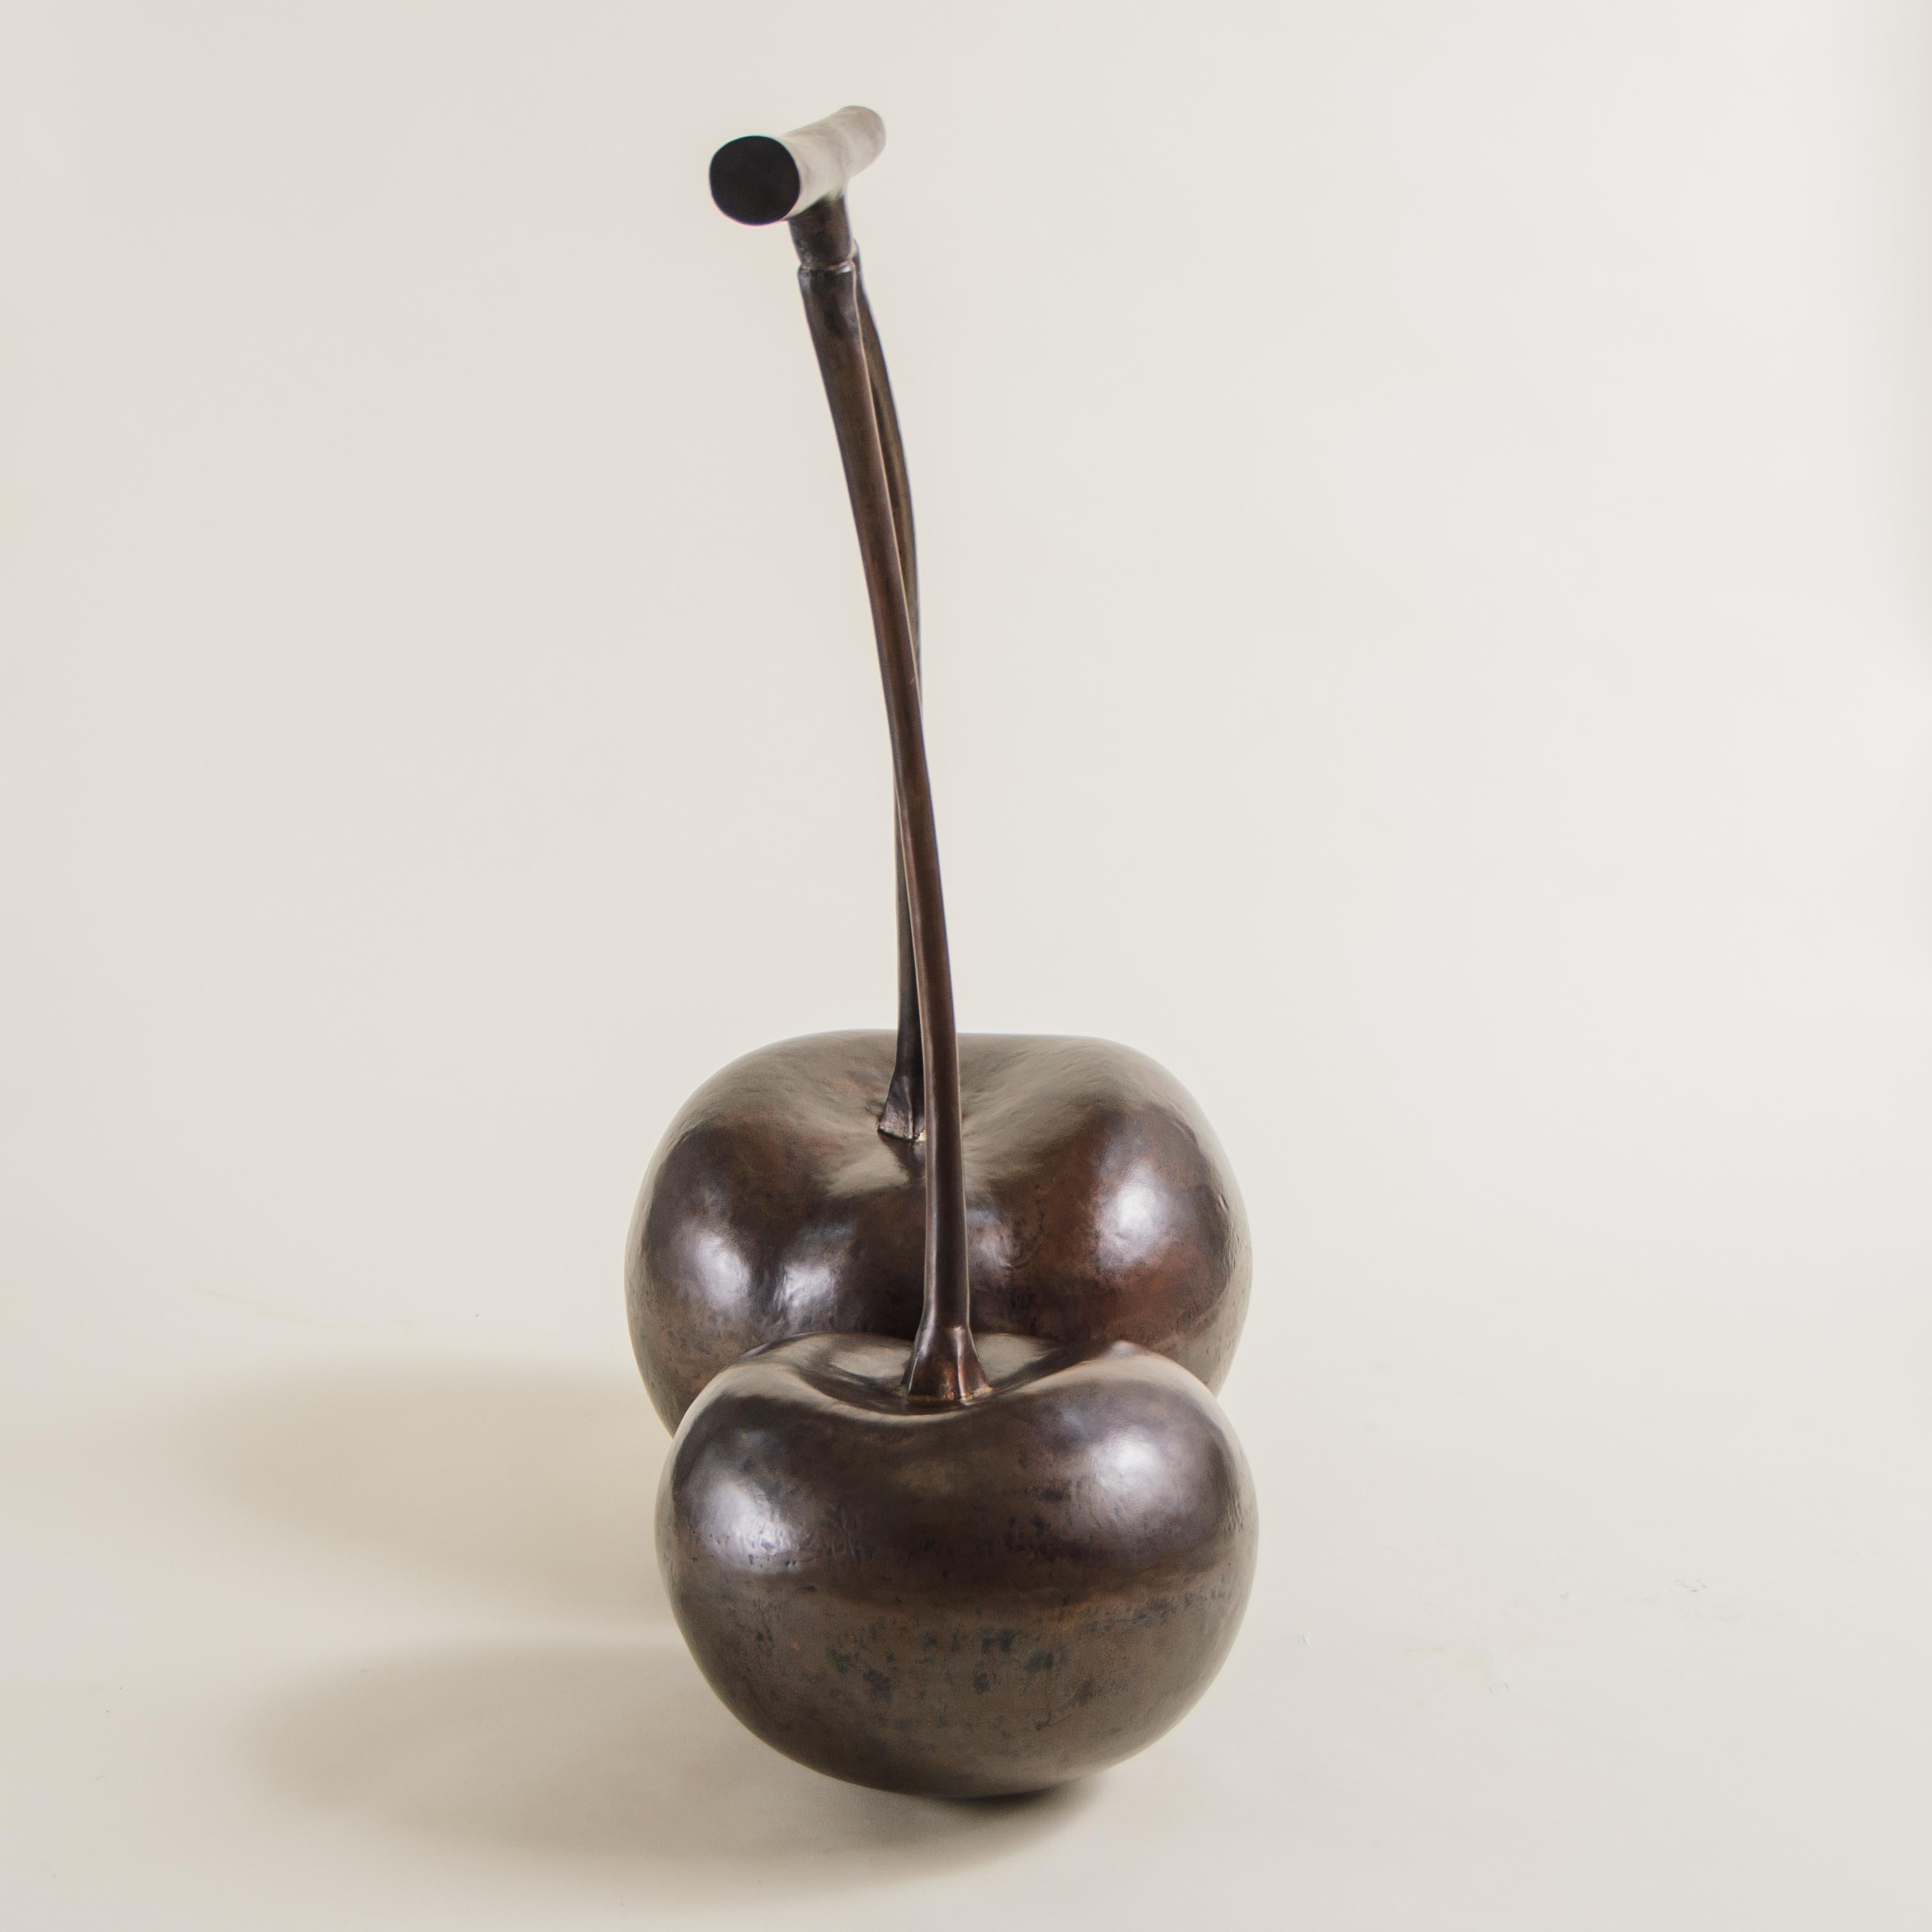 Repoussé Contemporary Cherries Sculpture in Dark Antique Copper by Robert Kuo For Sale